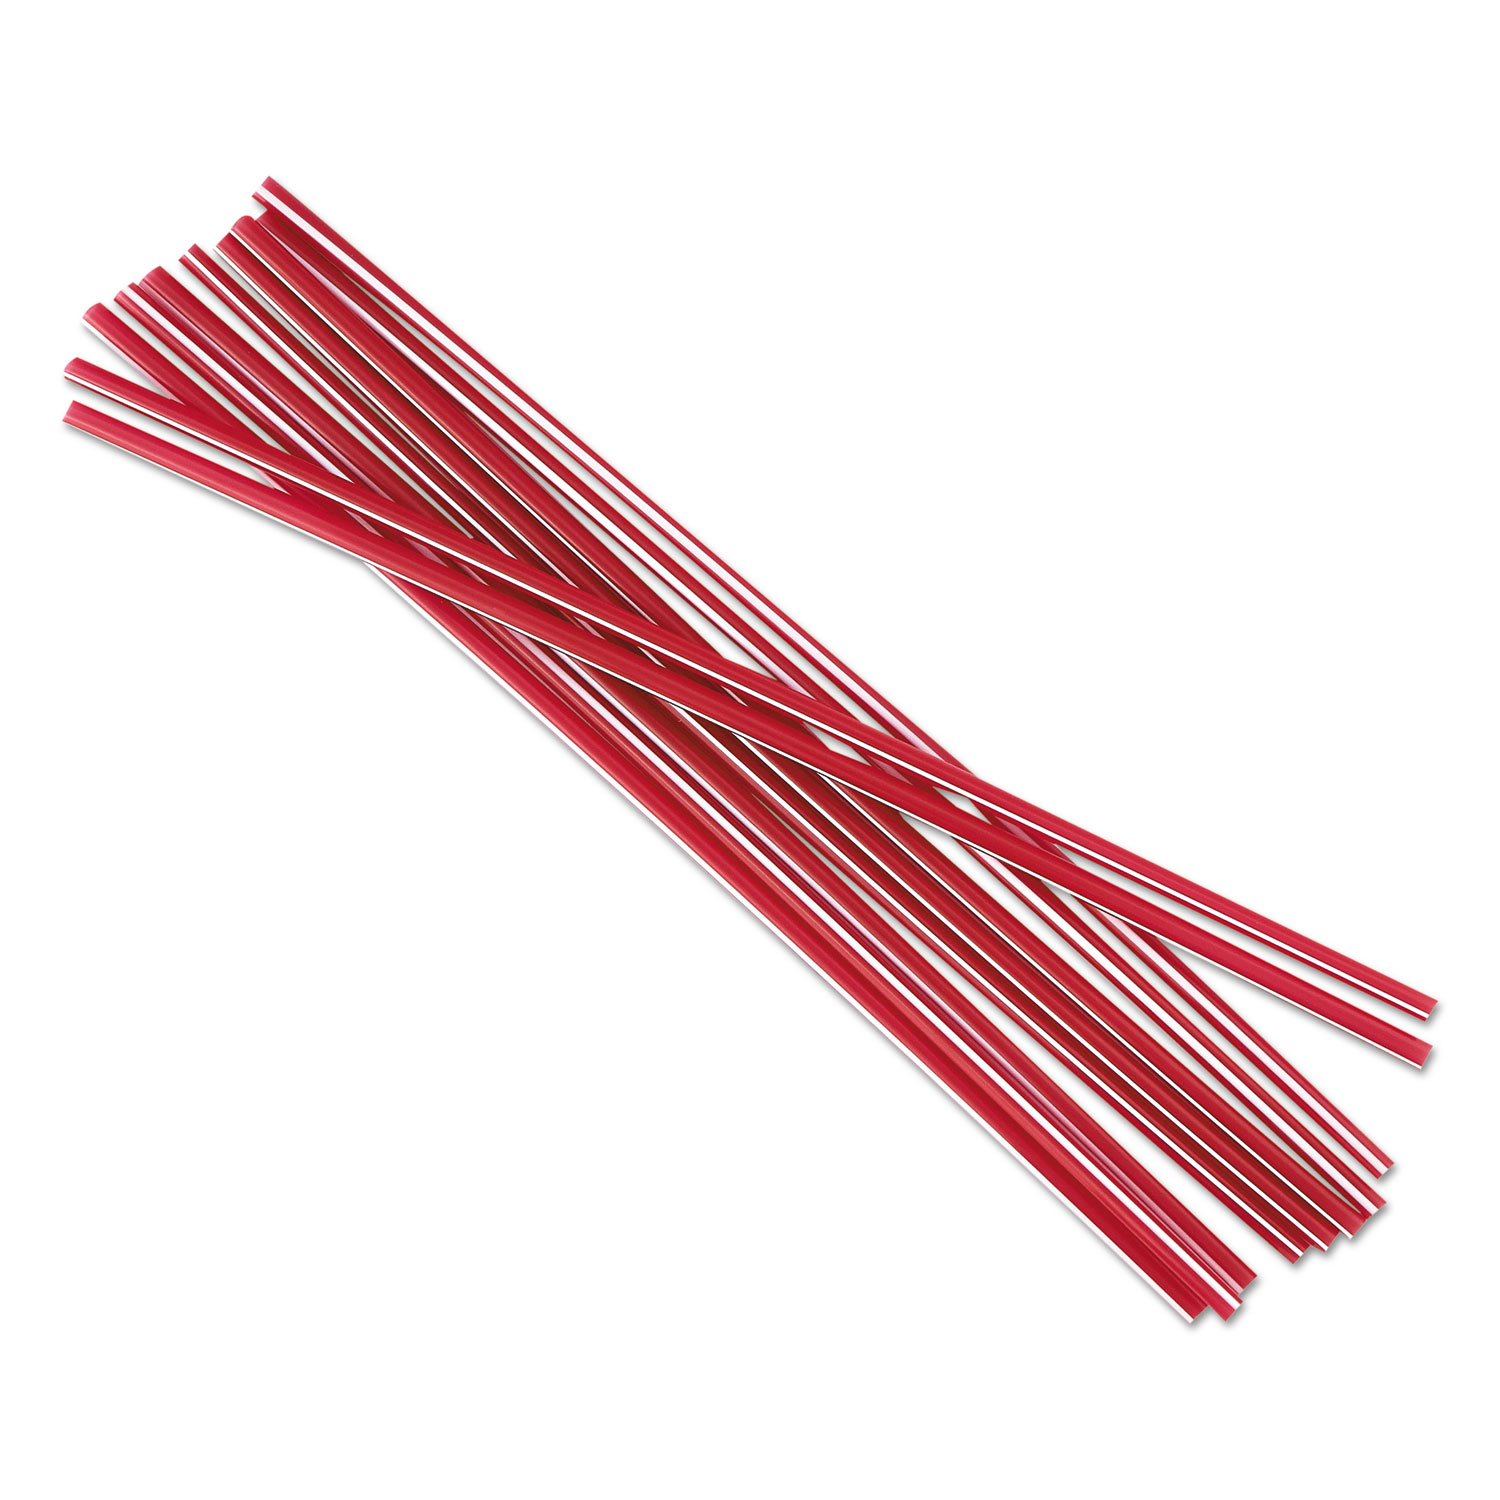 Unwrapped Cocktail Straws, 8, Plastic, Red w/White Stripe, 500/Pack